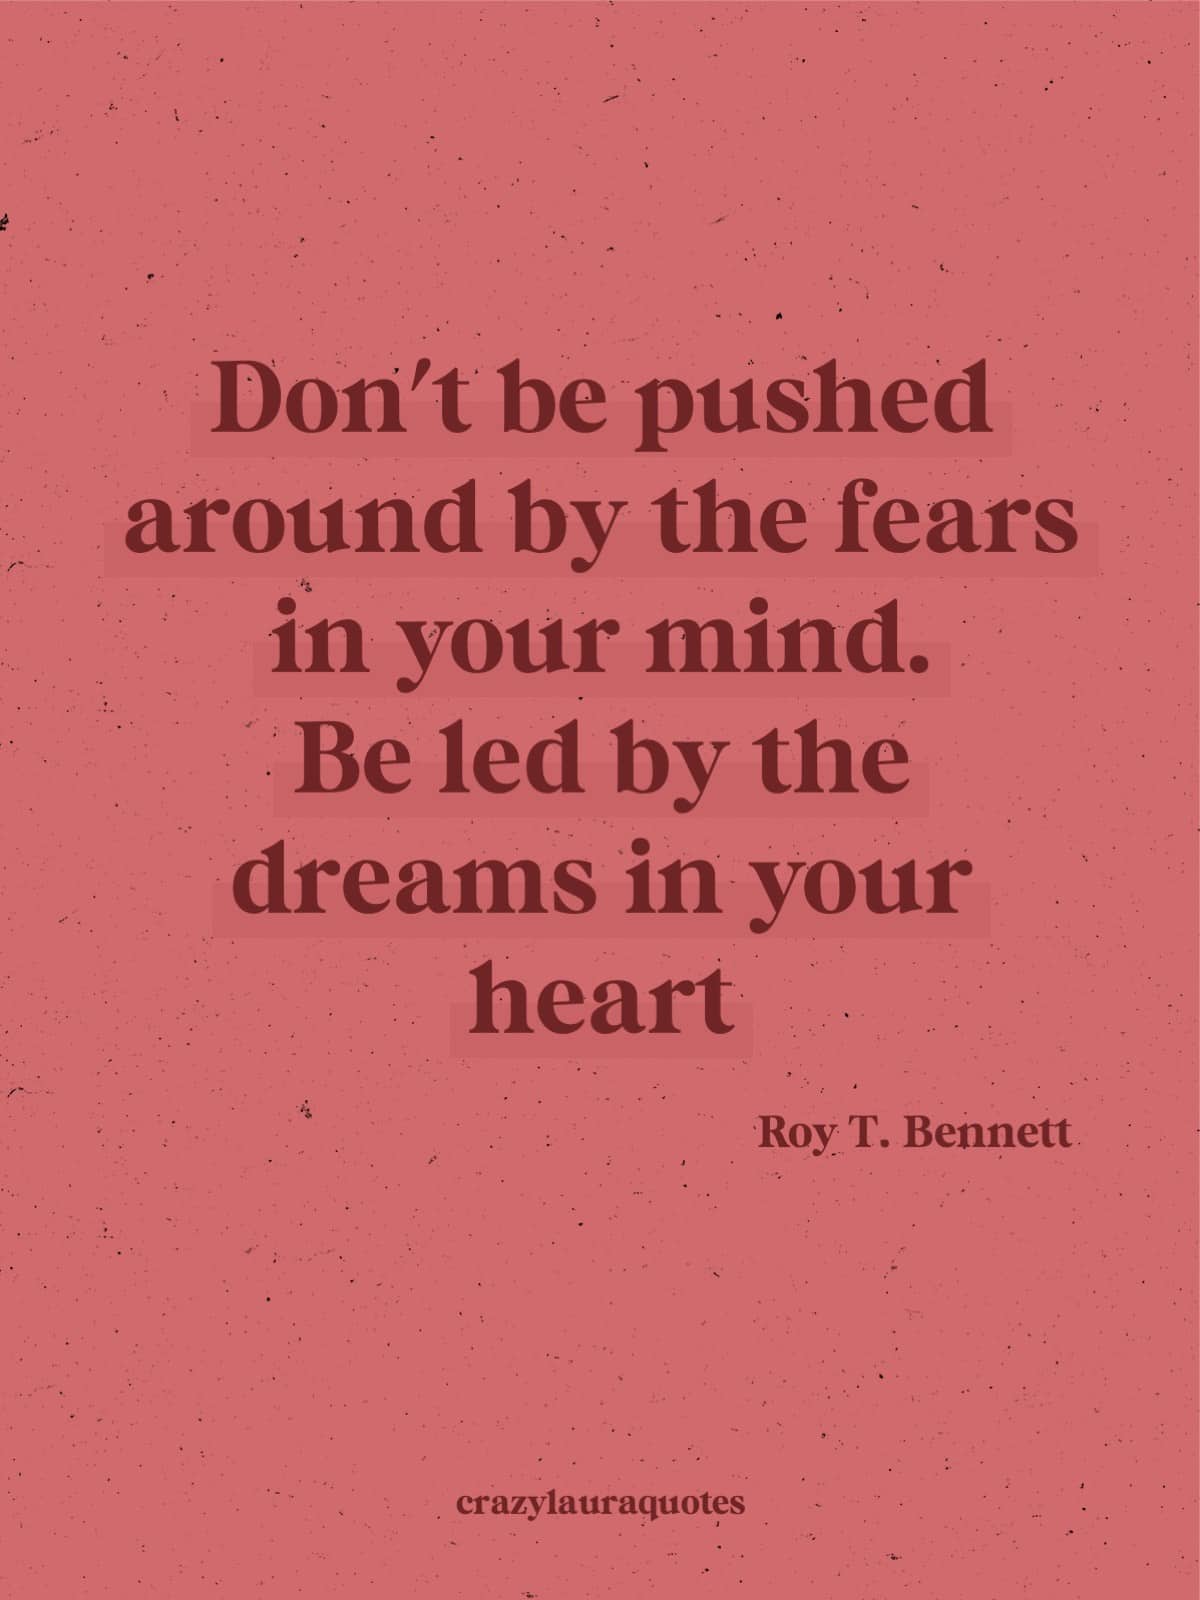 follow your dreams roy t bennett quote